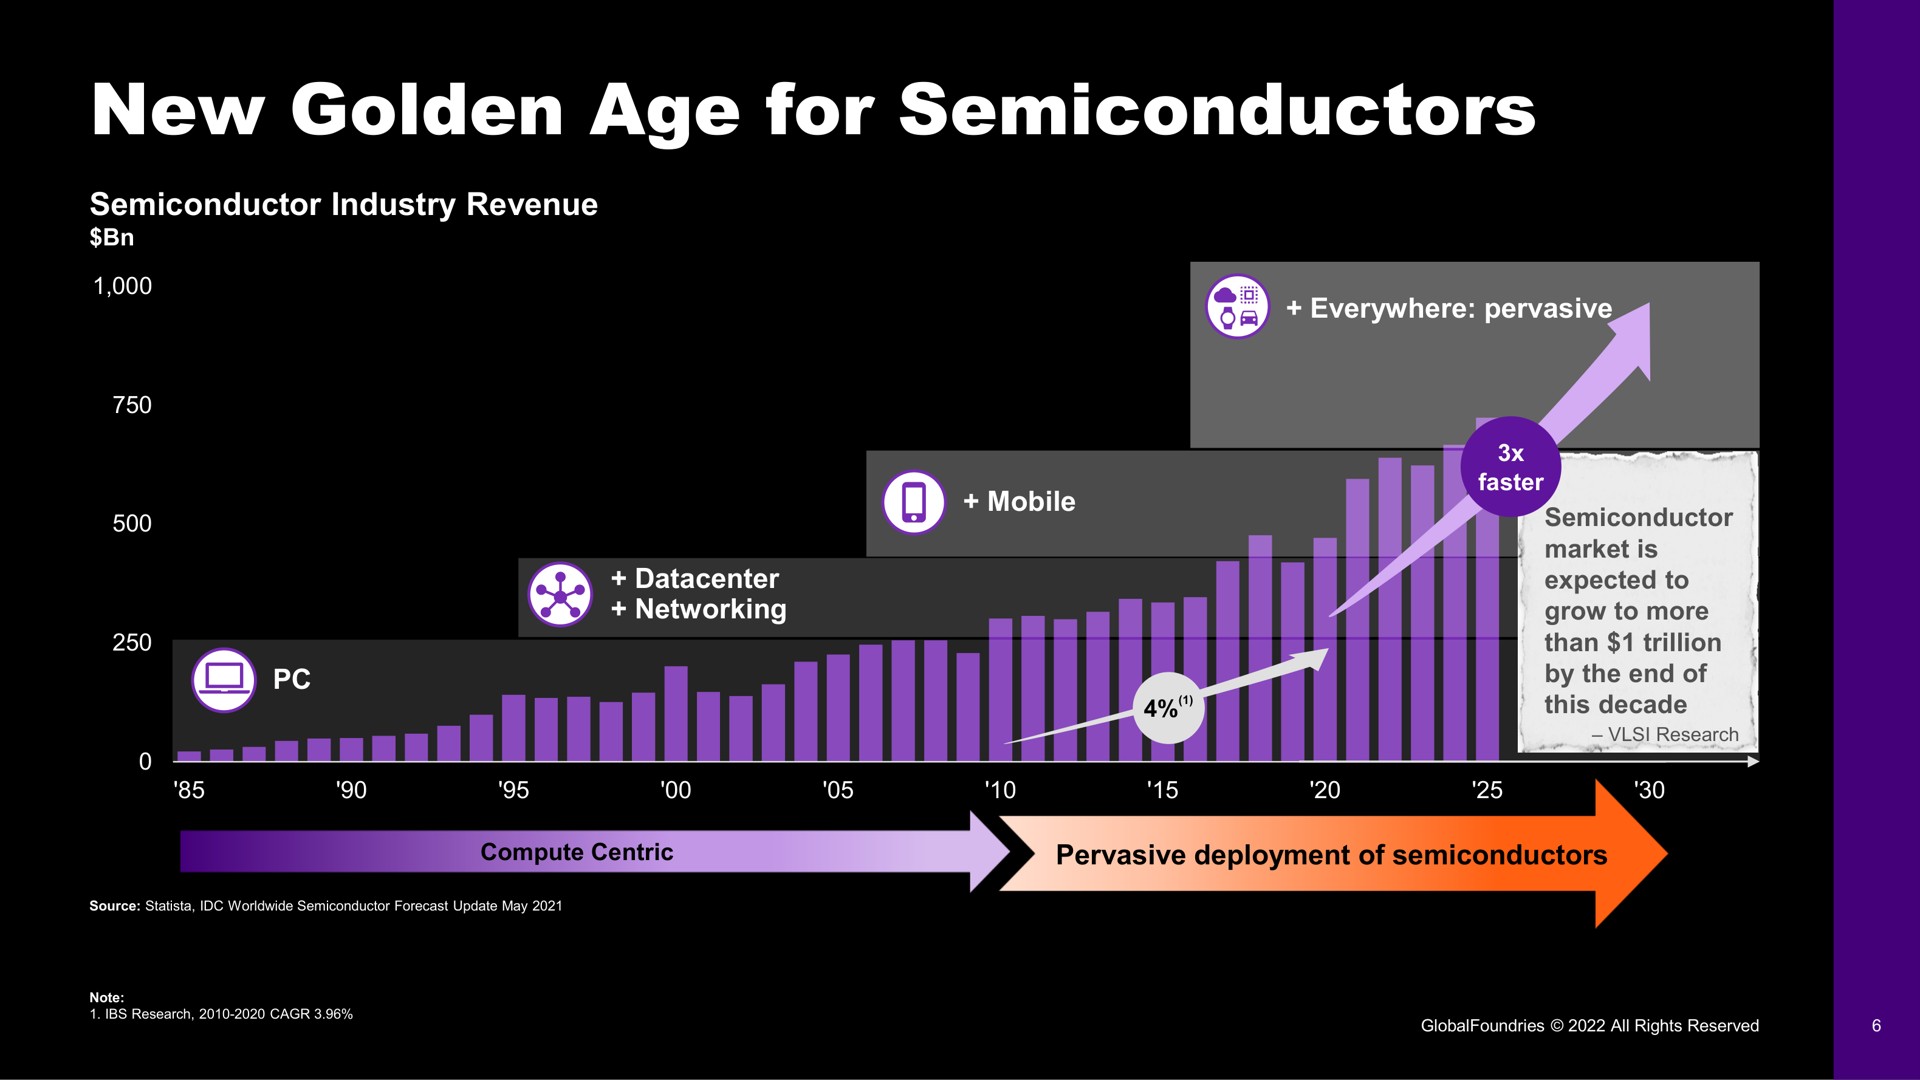 new golden age for semiconductors | GlobalFoundries